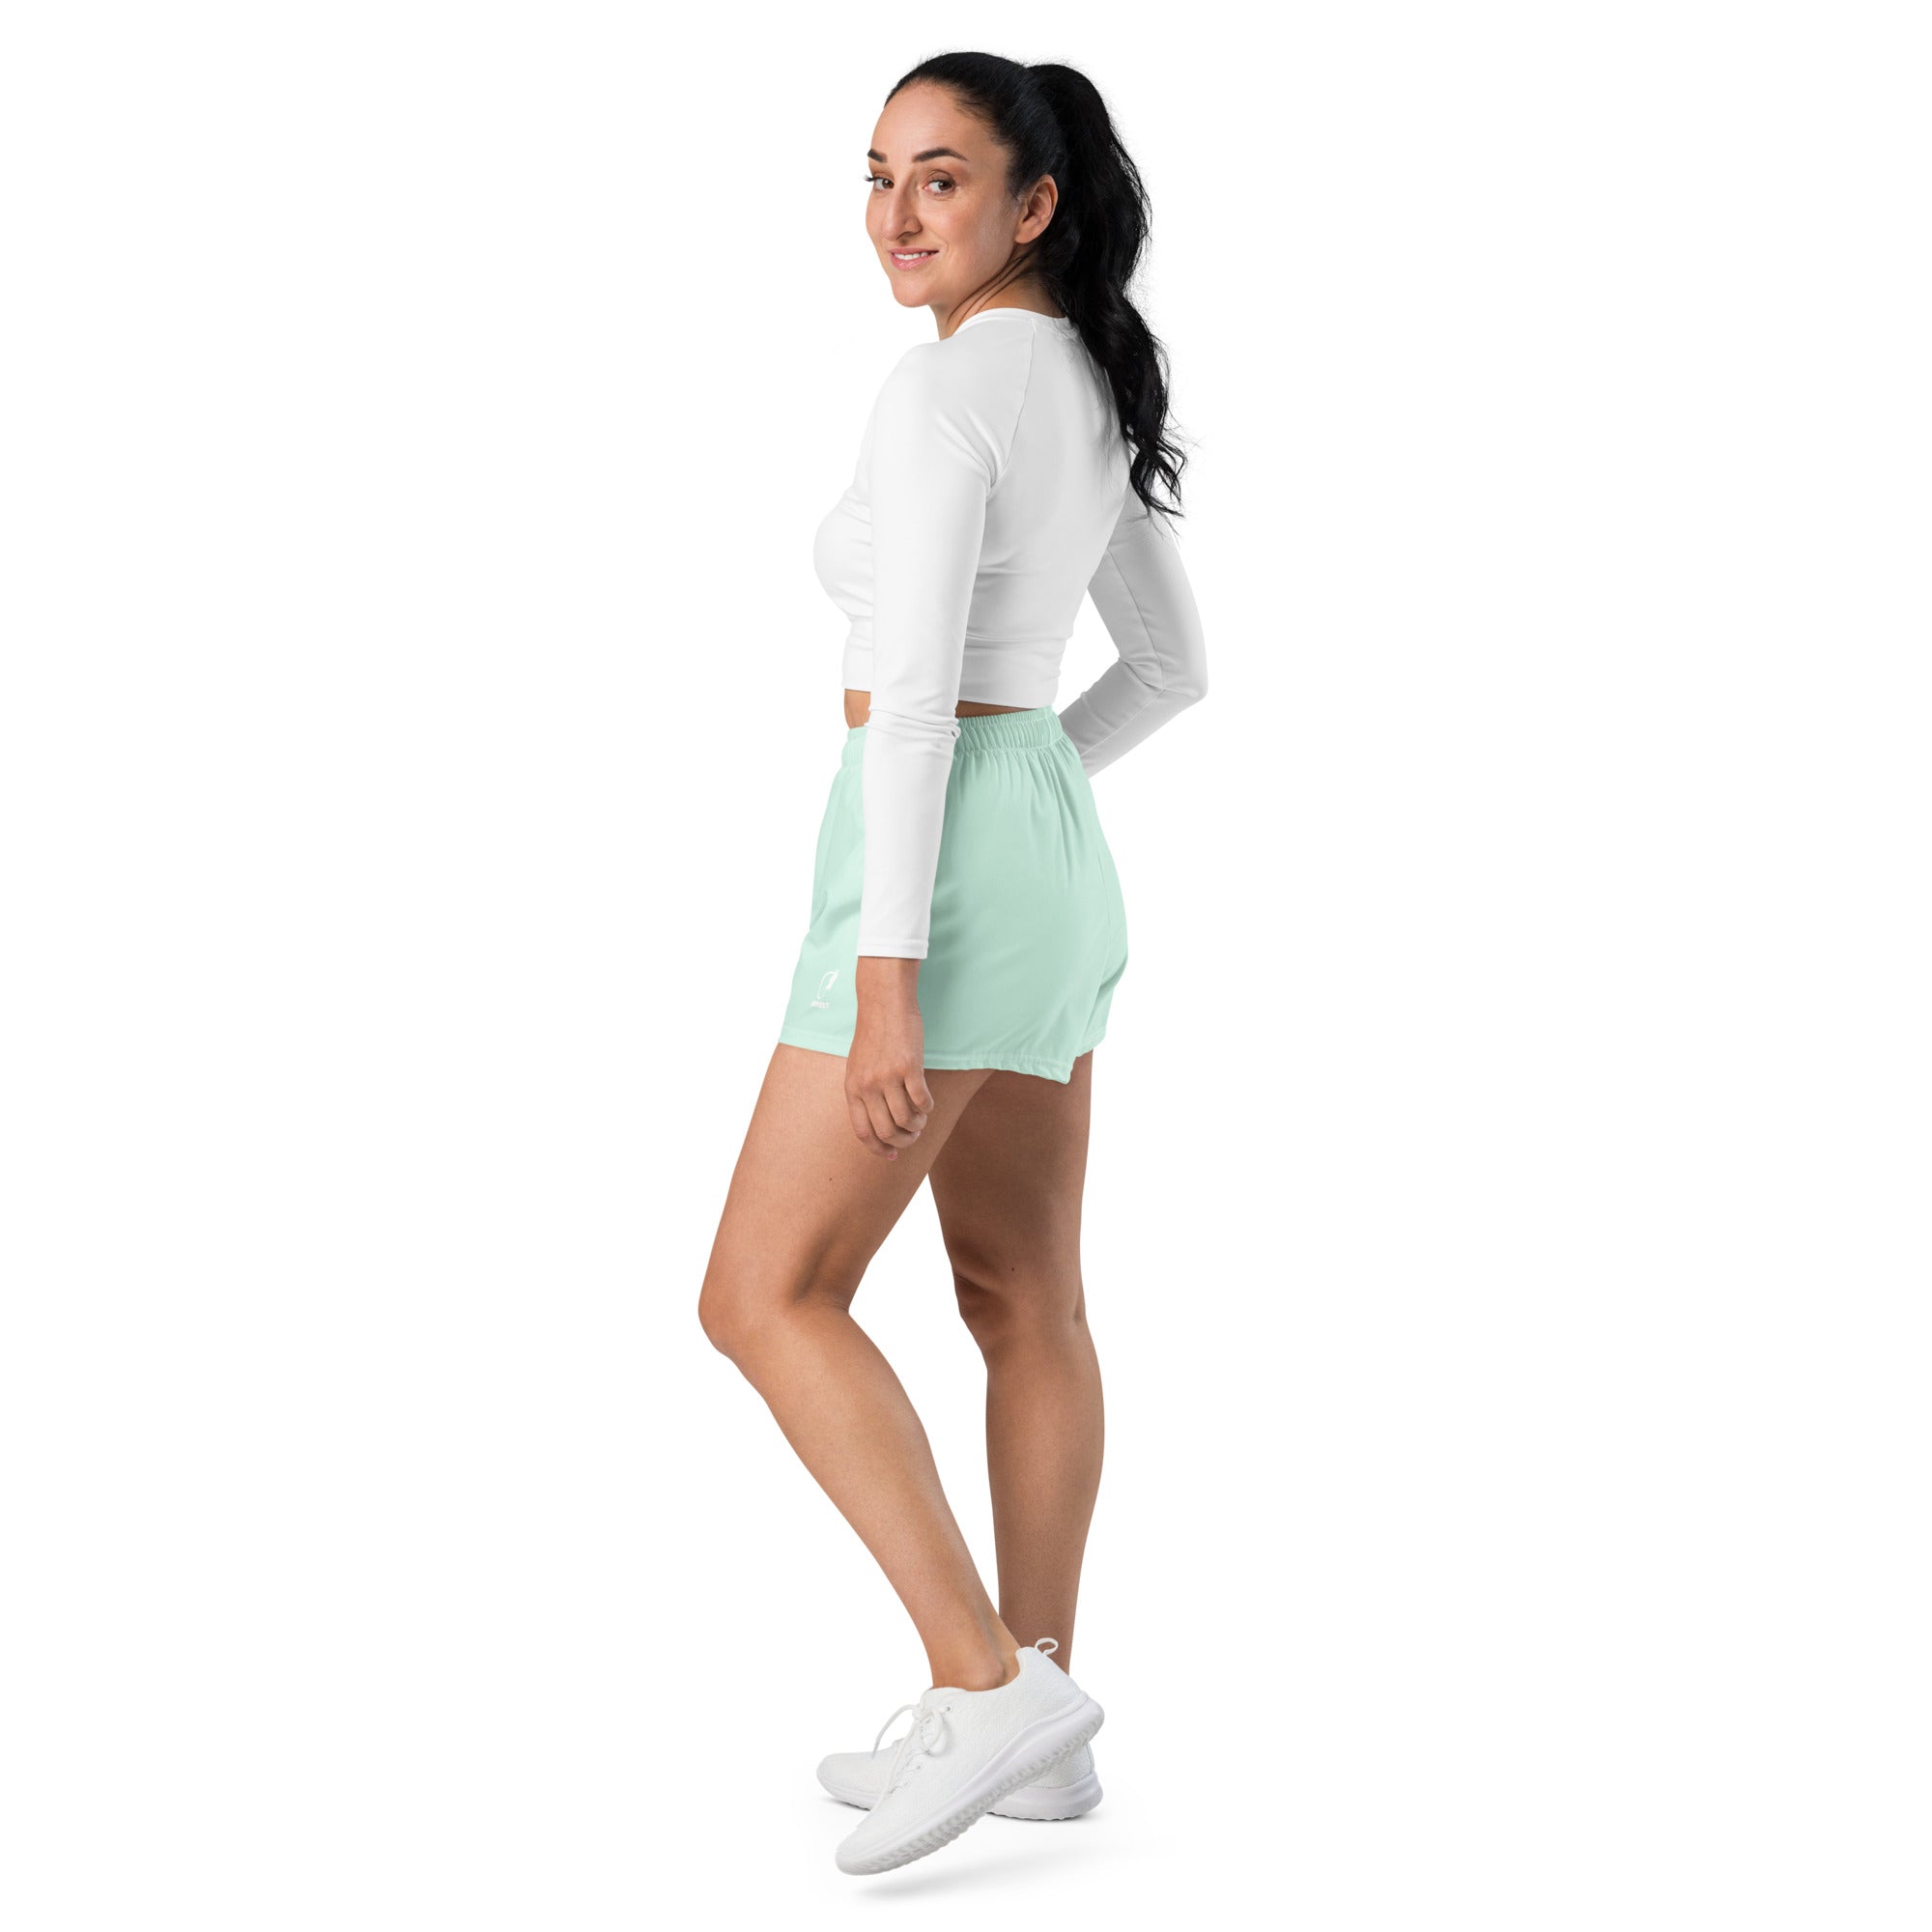 Mint Women’s Recycled Athletic Shorts